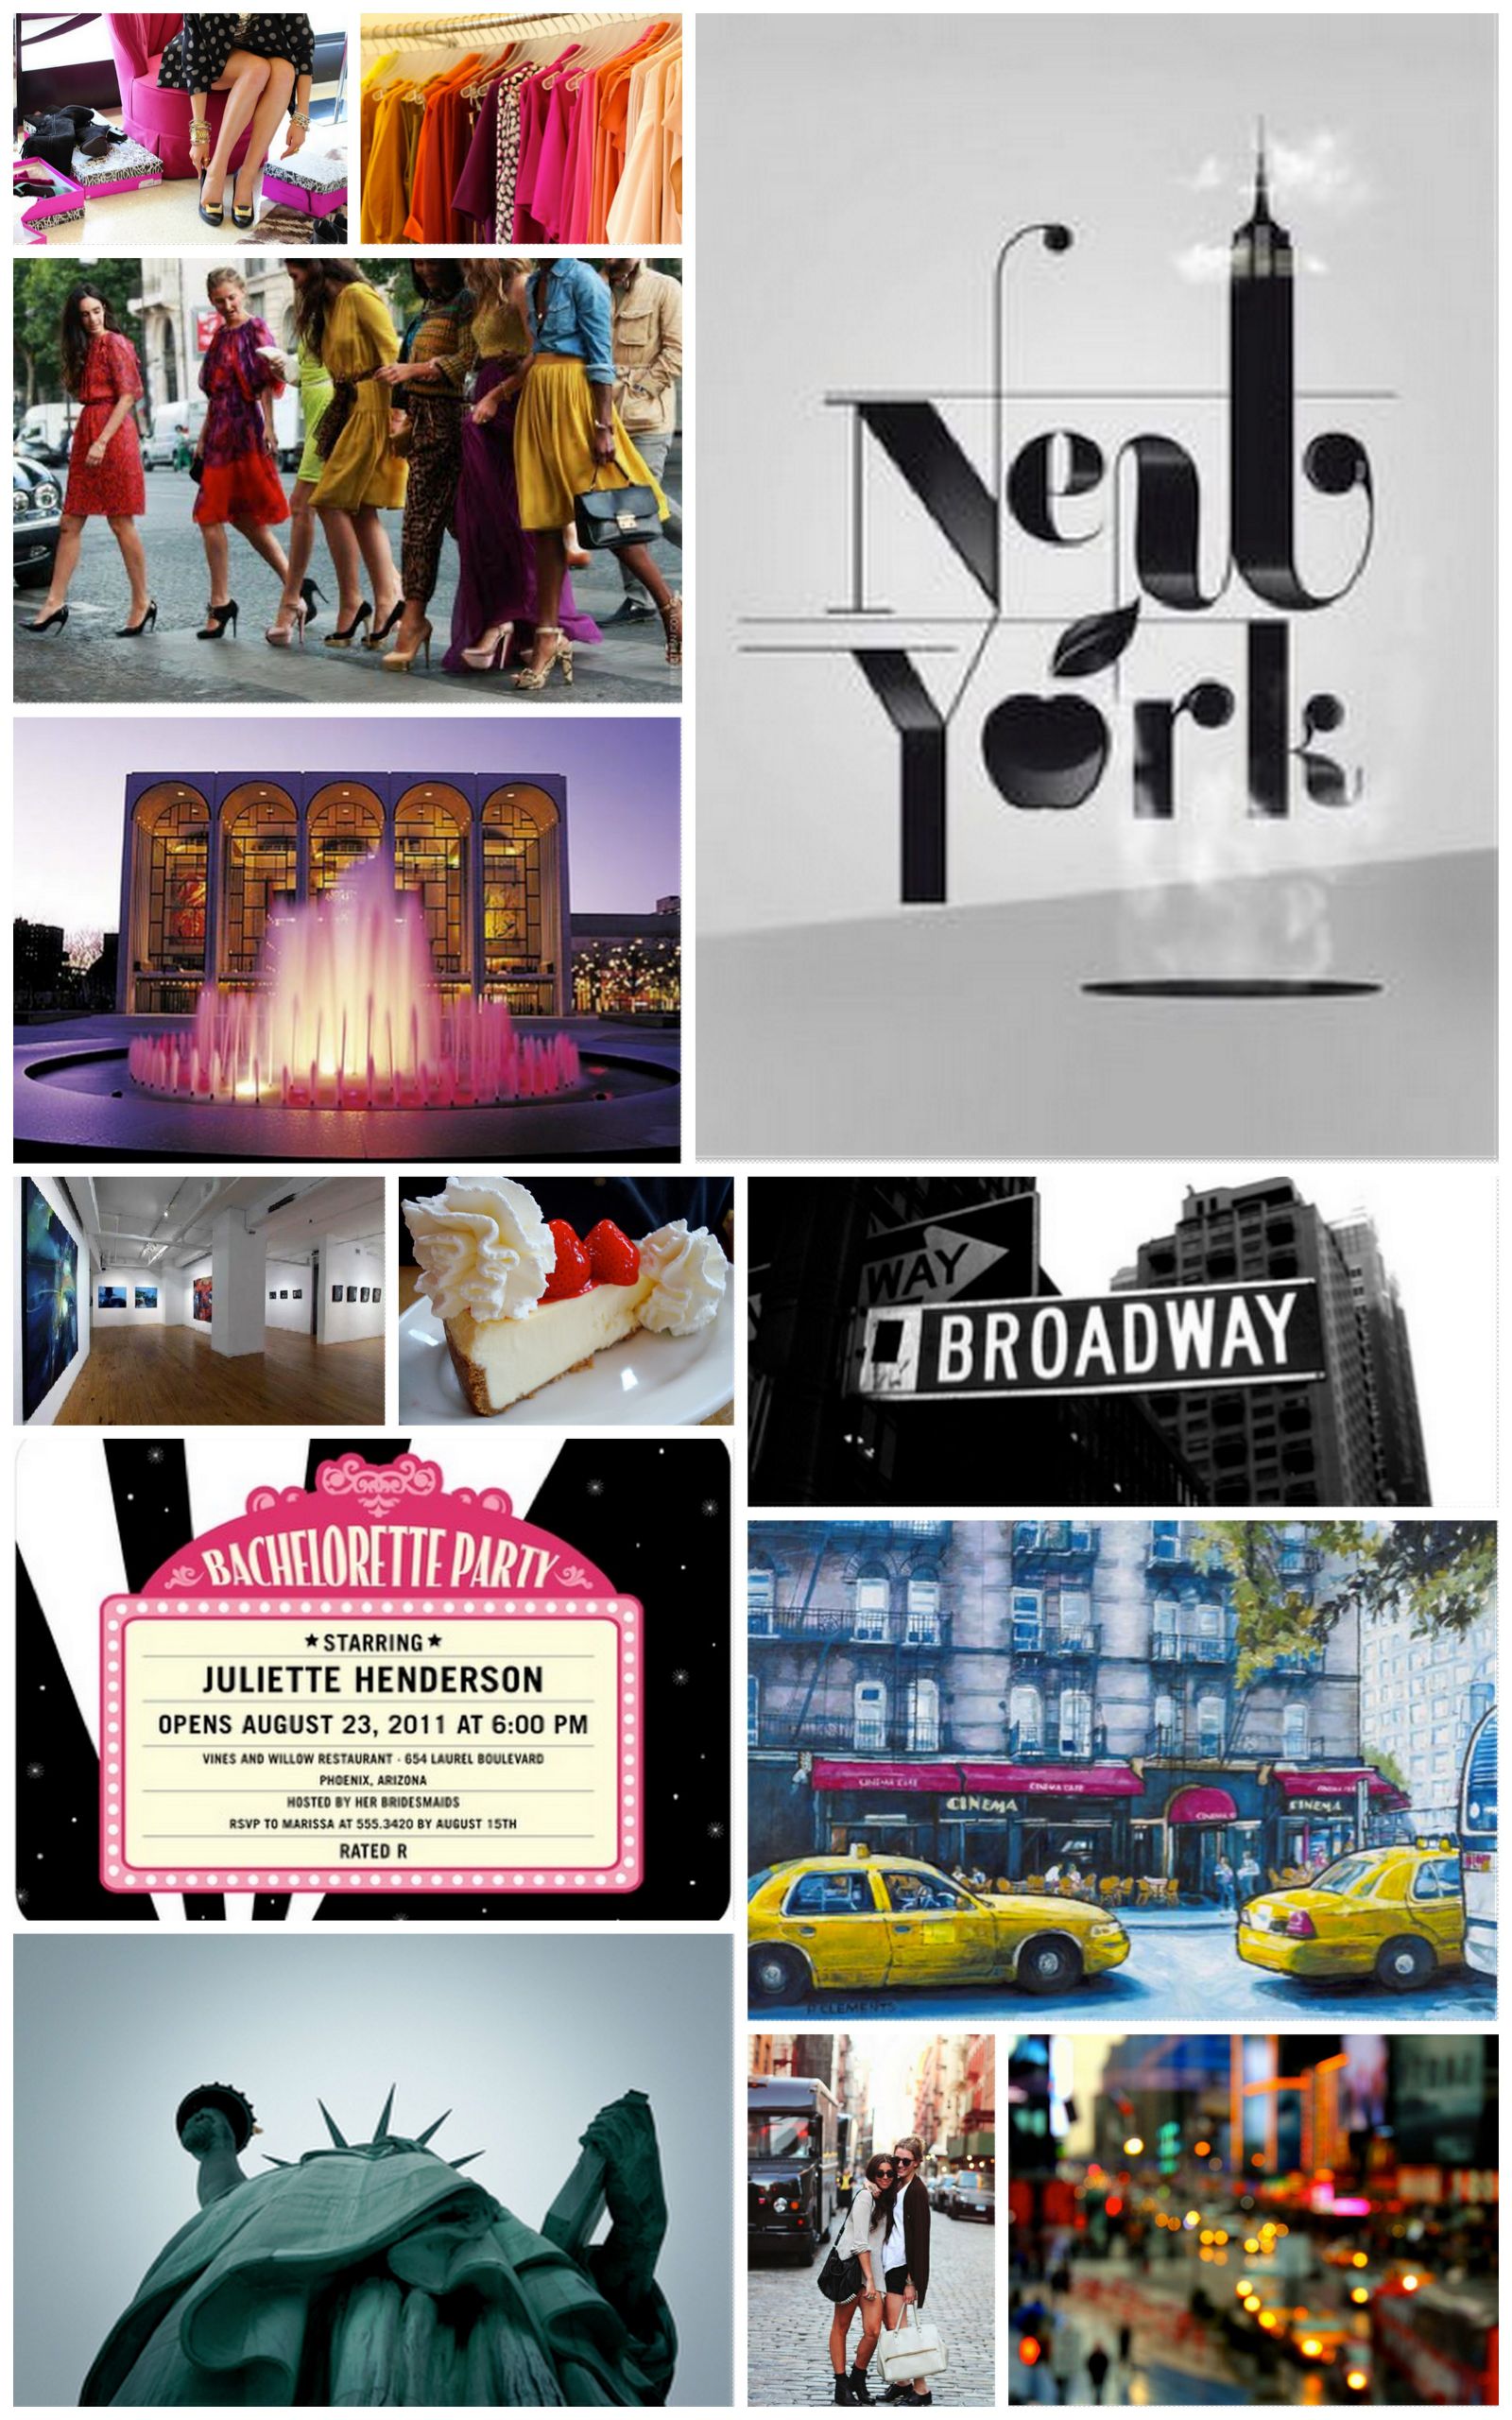 Best Bachelorette Party Ideas Nyc
 Top 22 Nyc Bachelorette Party Ideas Home Inspiration